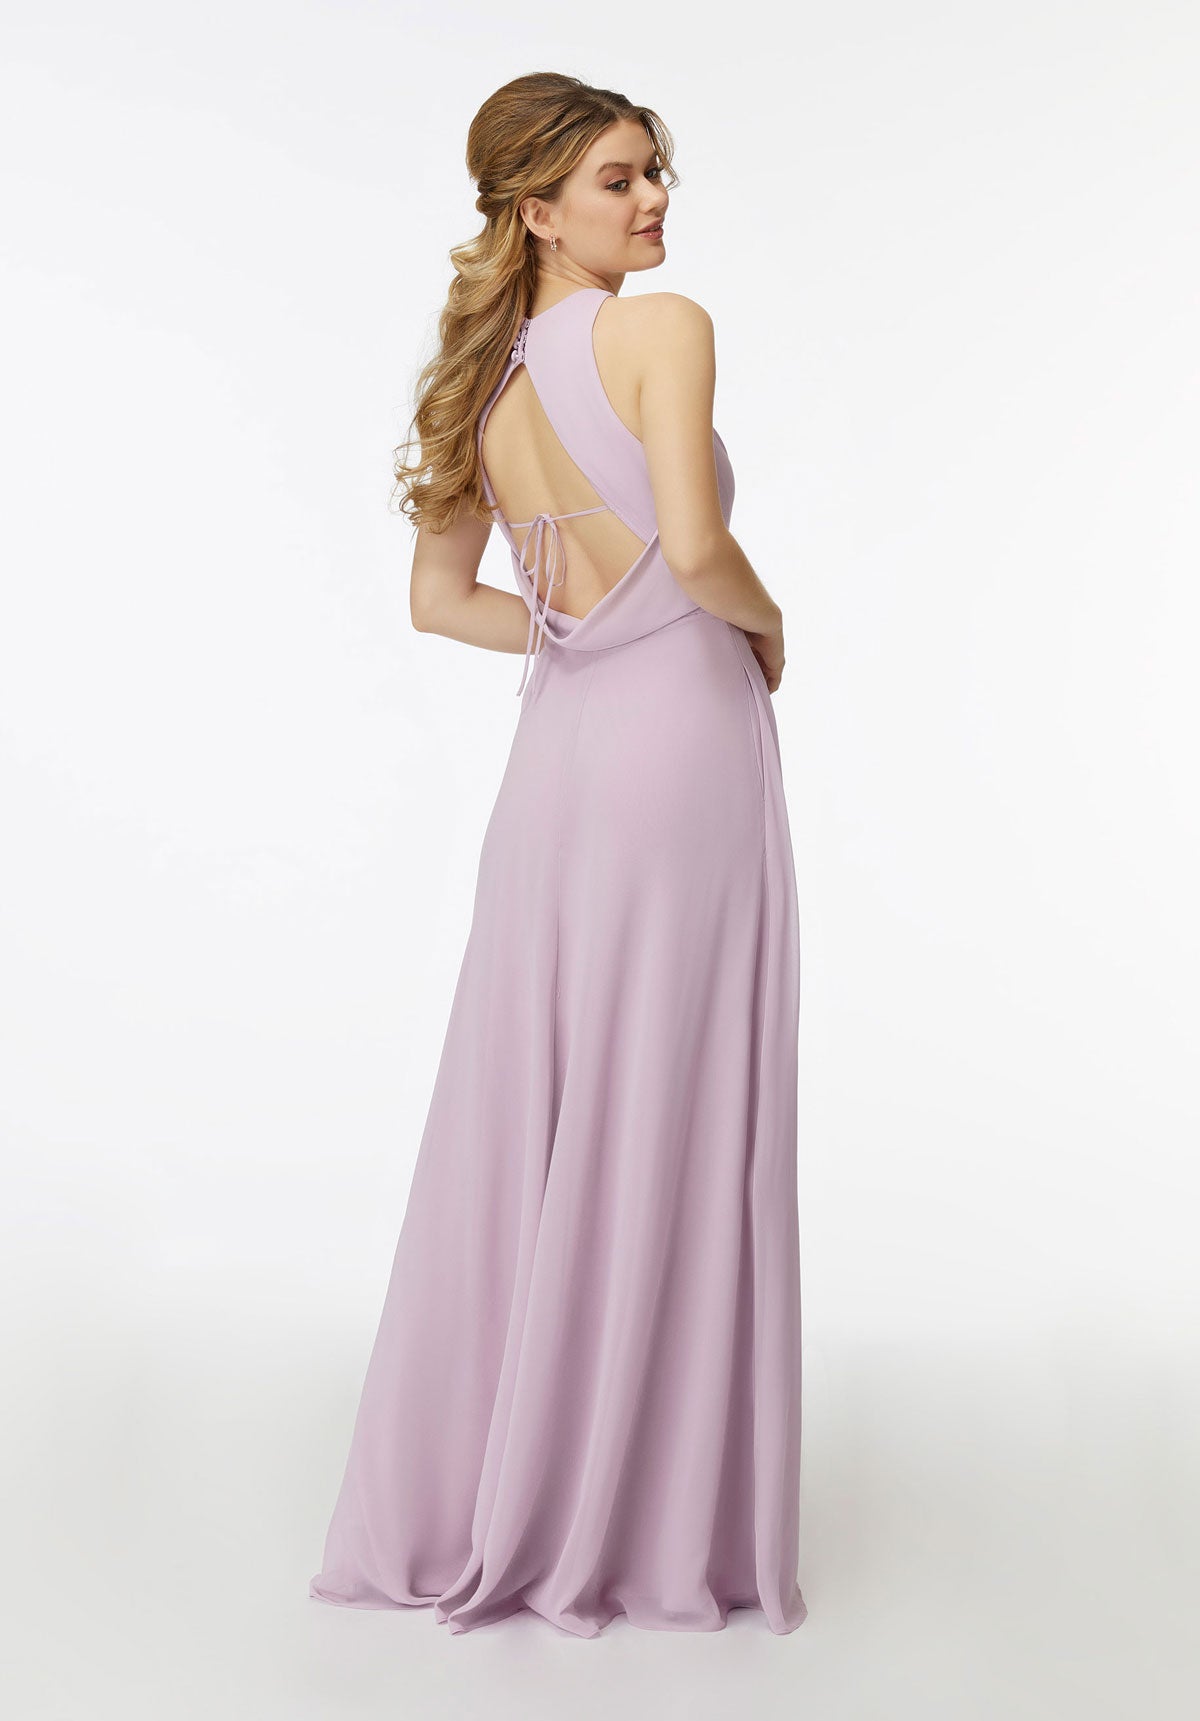 Morilee - 21726 - Cheron's Bridal, Bridesmaids Dress - Morilee - - Wedding Gowns Dresses Chattanooga Hixson Shops Boutiques Tennessee TN Georgia GA MSRP Lowest Prices Sale Discount